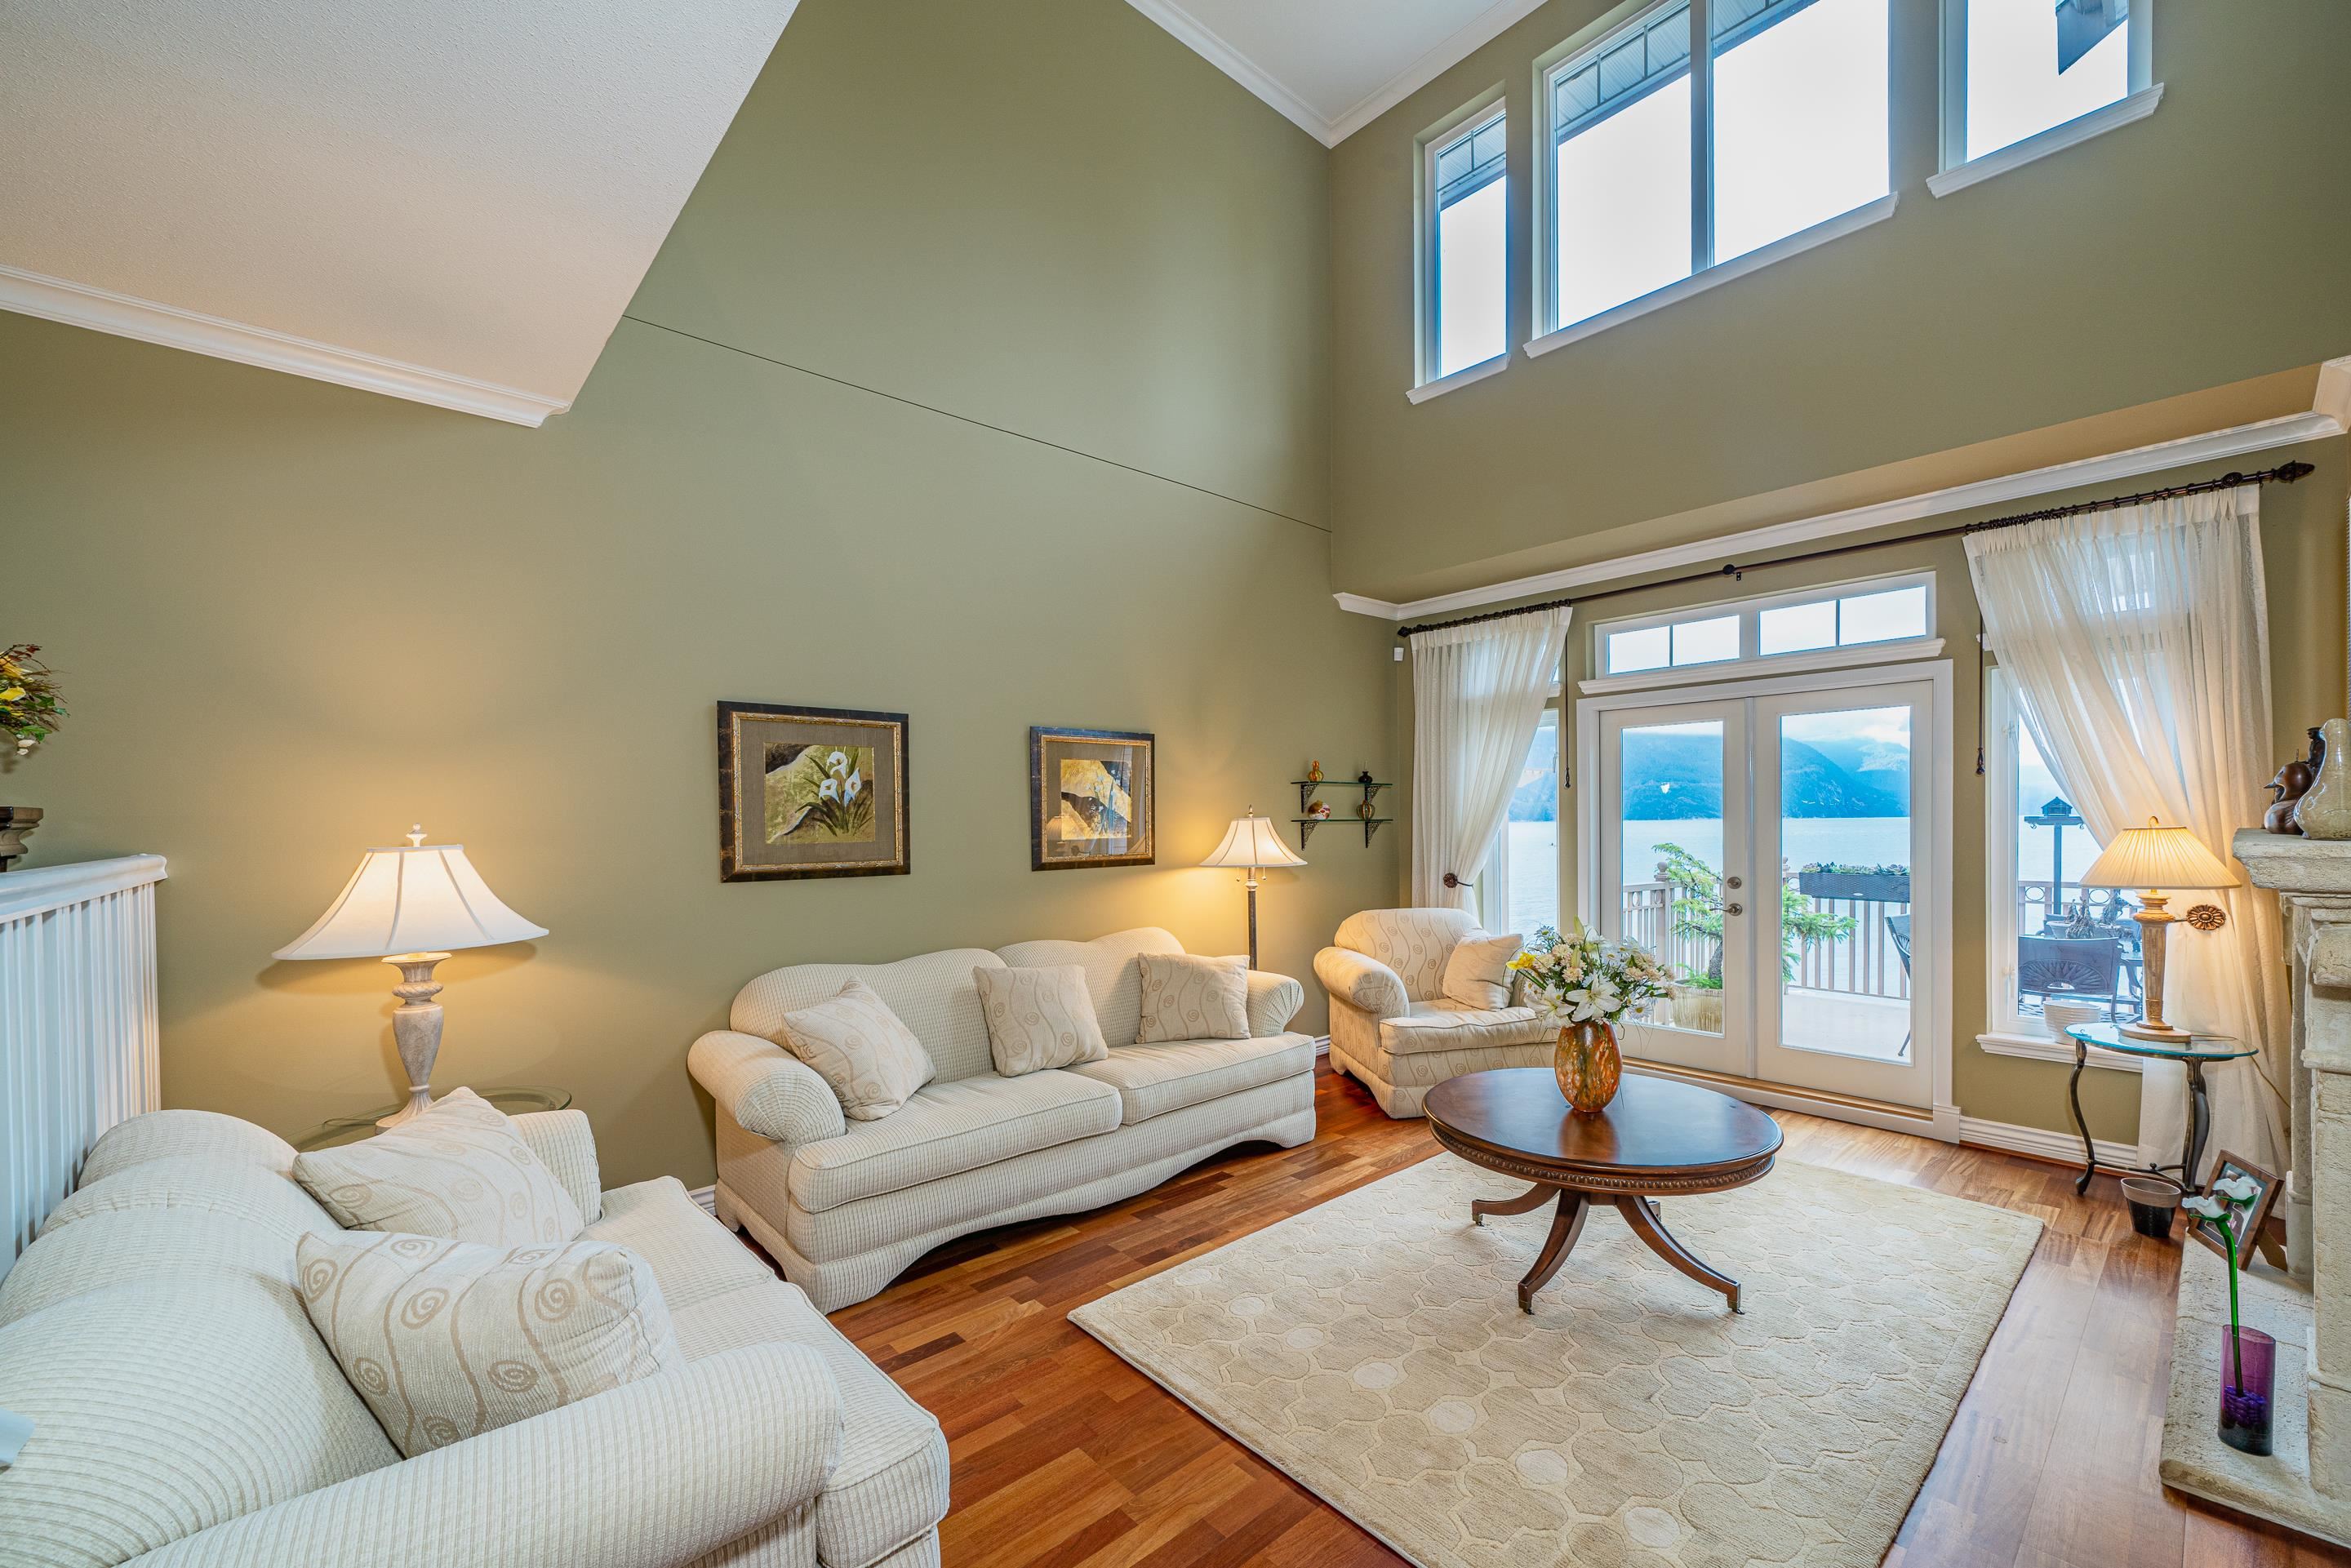 Listing image of 5 BEACH DRIVE